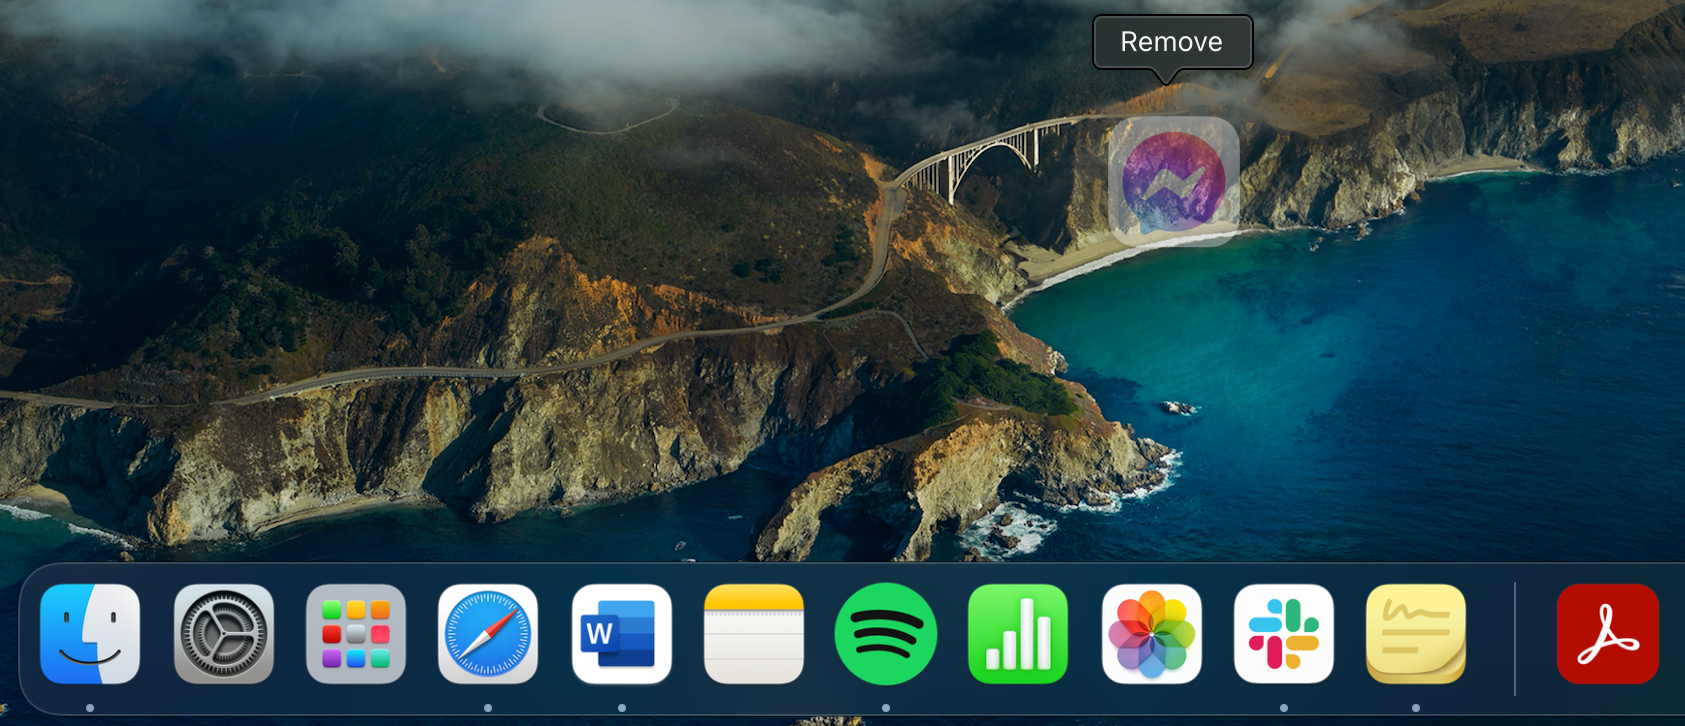 Remove Option for App on Mac Dock